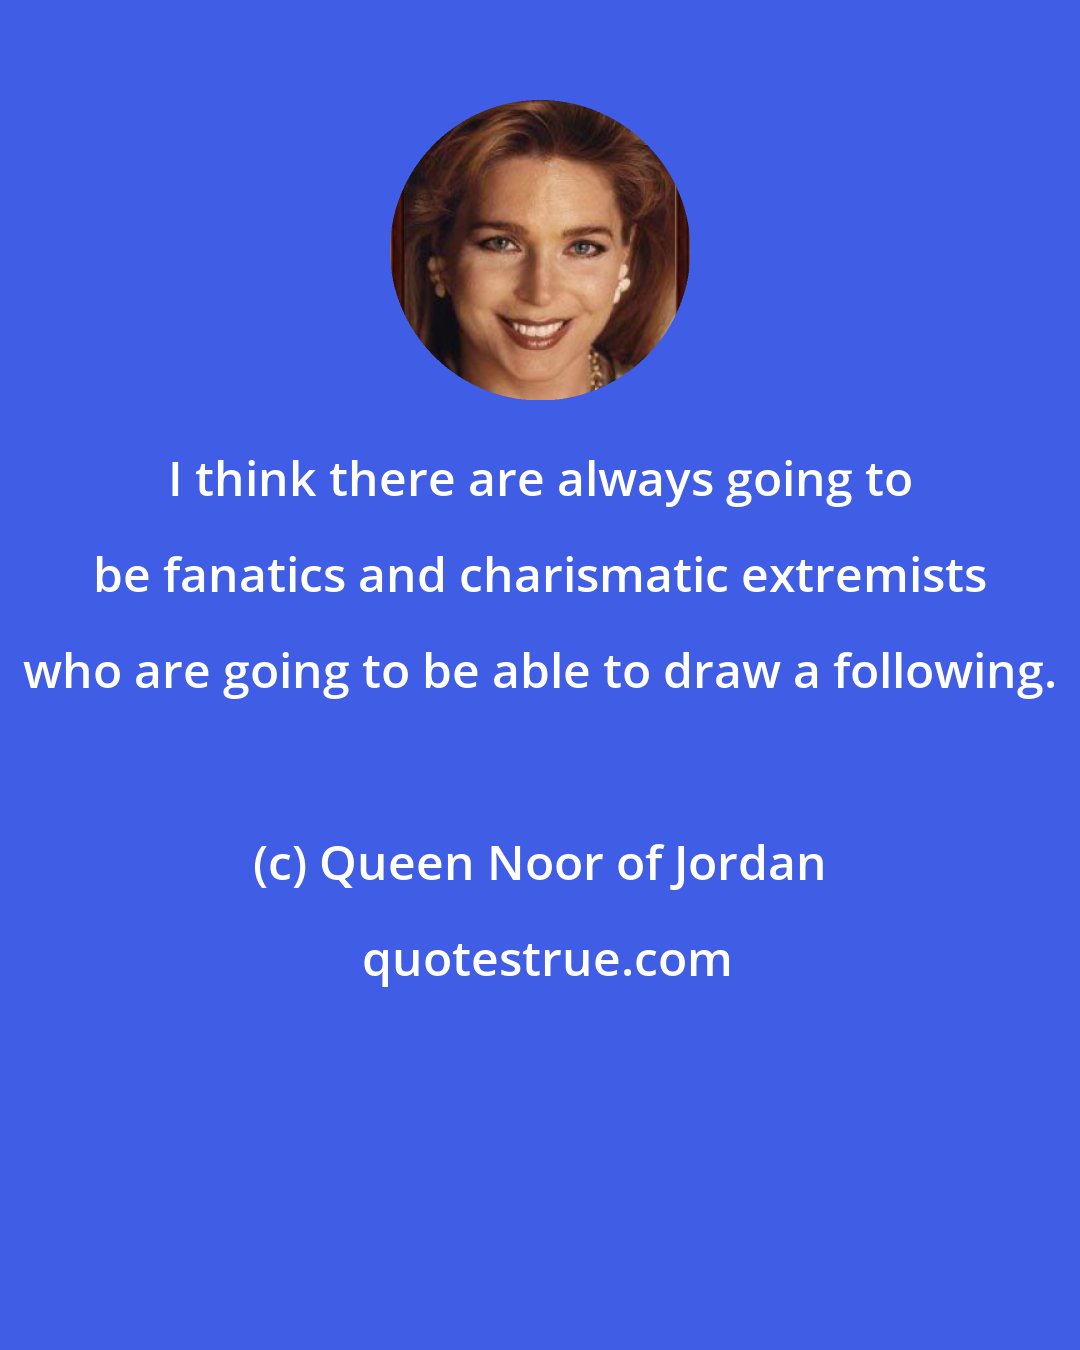 Queen Noor of Jordan: I think there are always going to be fanatics and charismatic extremists who are going to be able to draw a following.